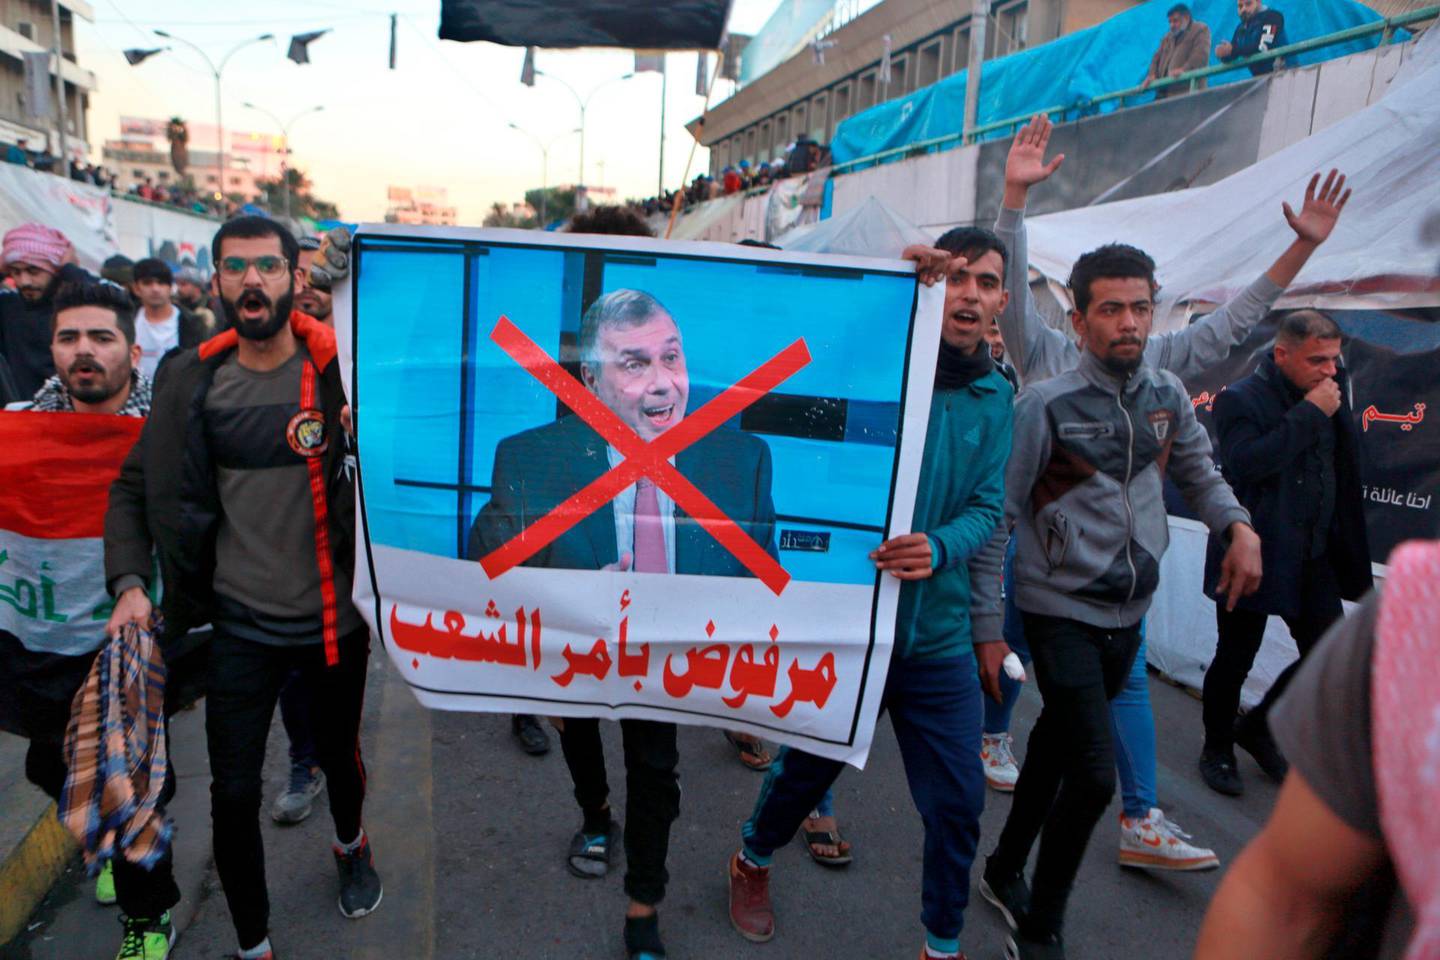 Protesters chant slogans while holding posters of newly appointed Prime Minister Mohammed Allawi with Arabic that reads, "Rejected by the people" during a demonstration in Tahrir Square, Baghdad, Iraq, Sunday, Feb. 2, 2020. Anti-government demonstrators on Sunday rejected Iraq's new prime minister-designate after he was nominated by rival government factions, compounding the challenges he will have to surmount to resolve months of civil unrest. (AP Photo/Khalid Mohammed)